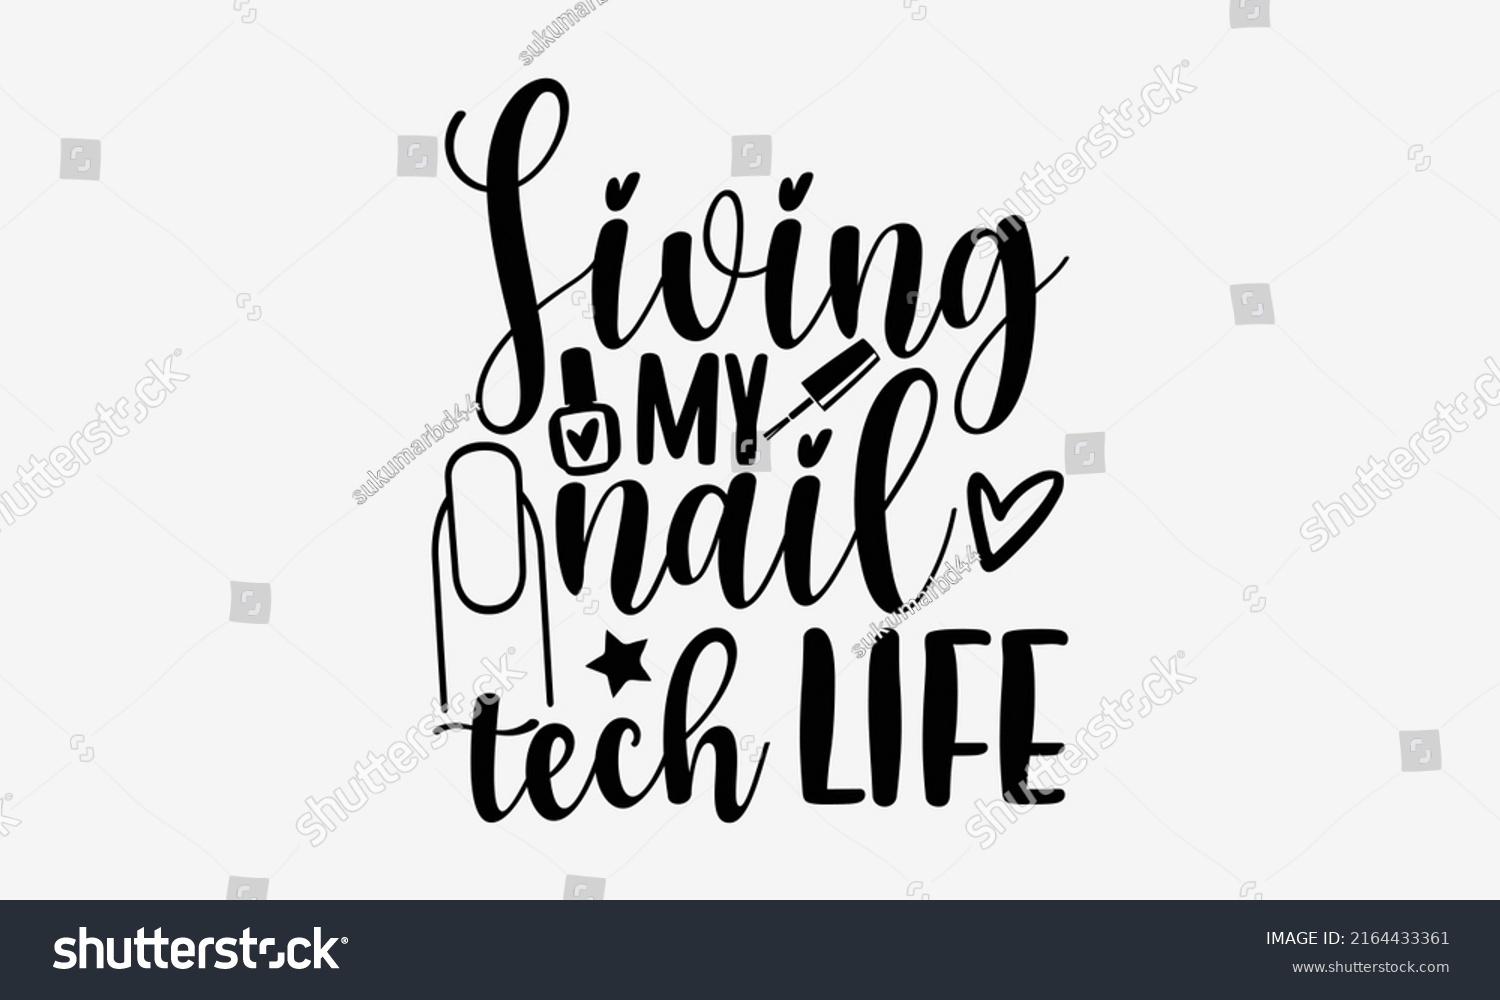 SVG of Living my nail tech life - Nail Tech  t shirt design, Hand drawn lettering phrase, Calligraphy graphic design, SVG Files for Cutting Cricut and Silhouette svg